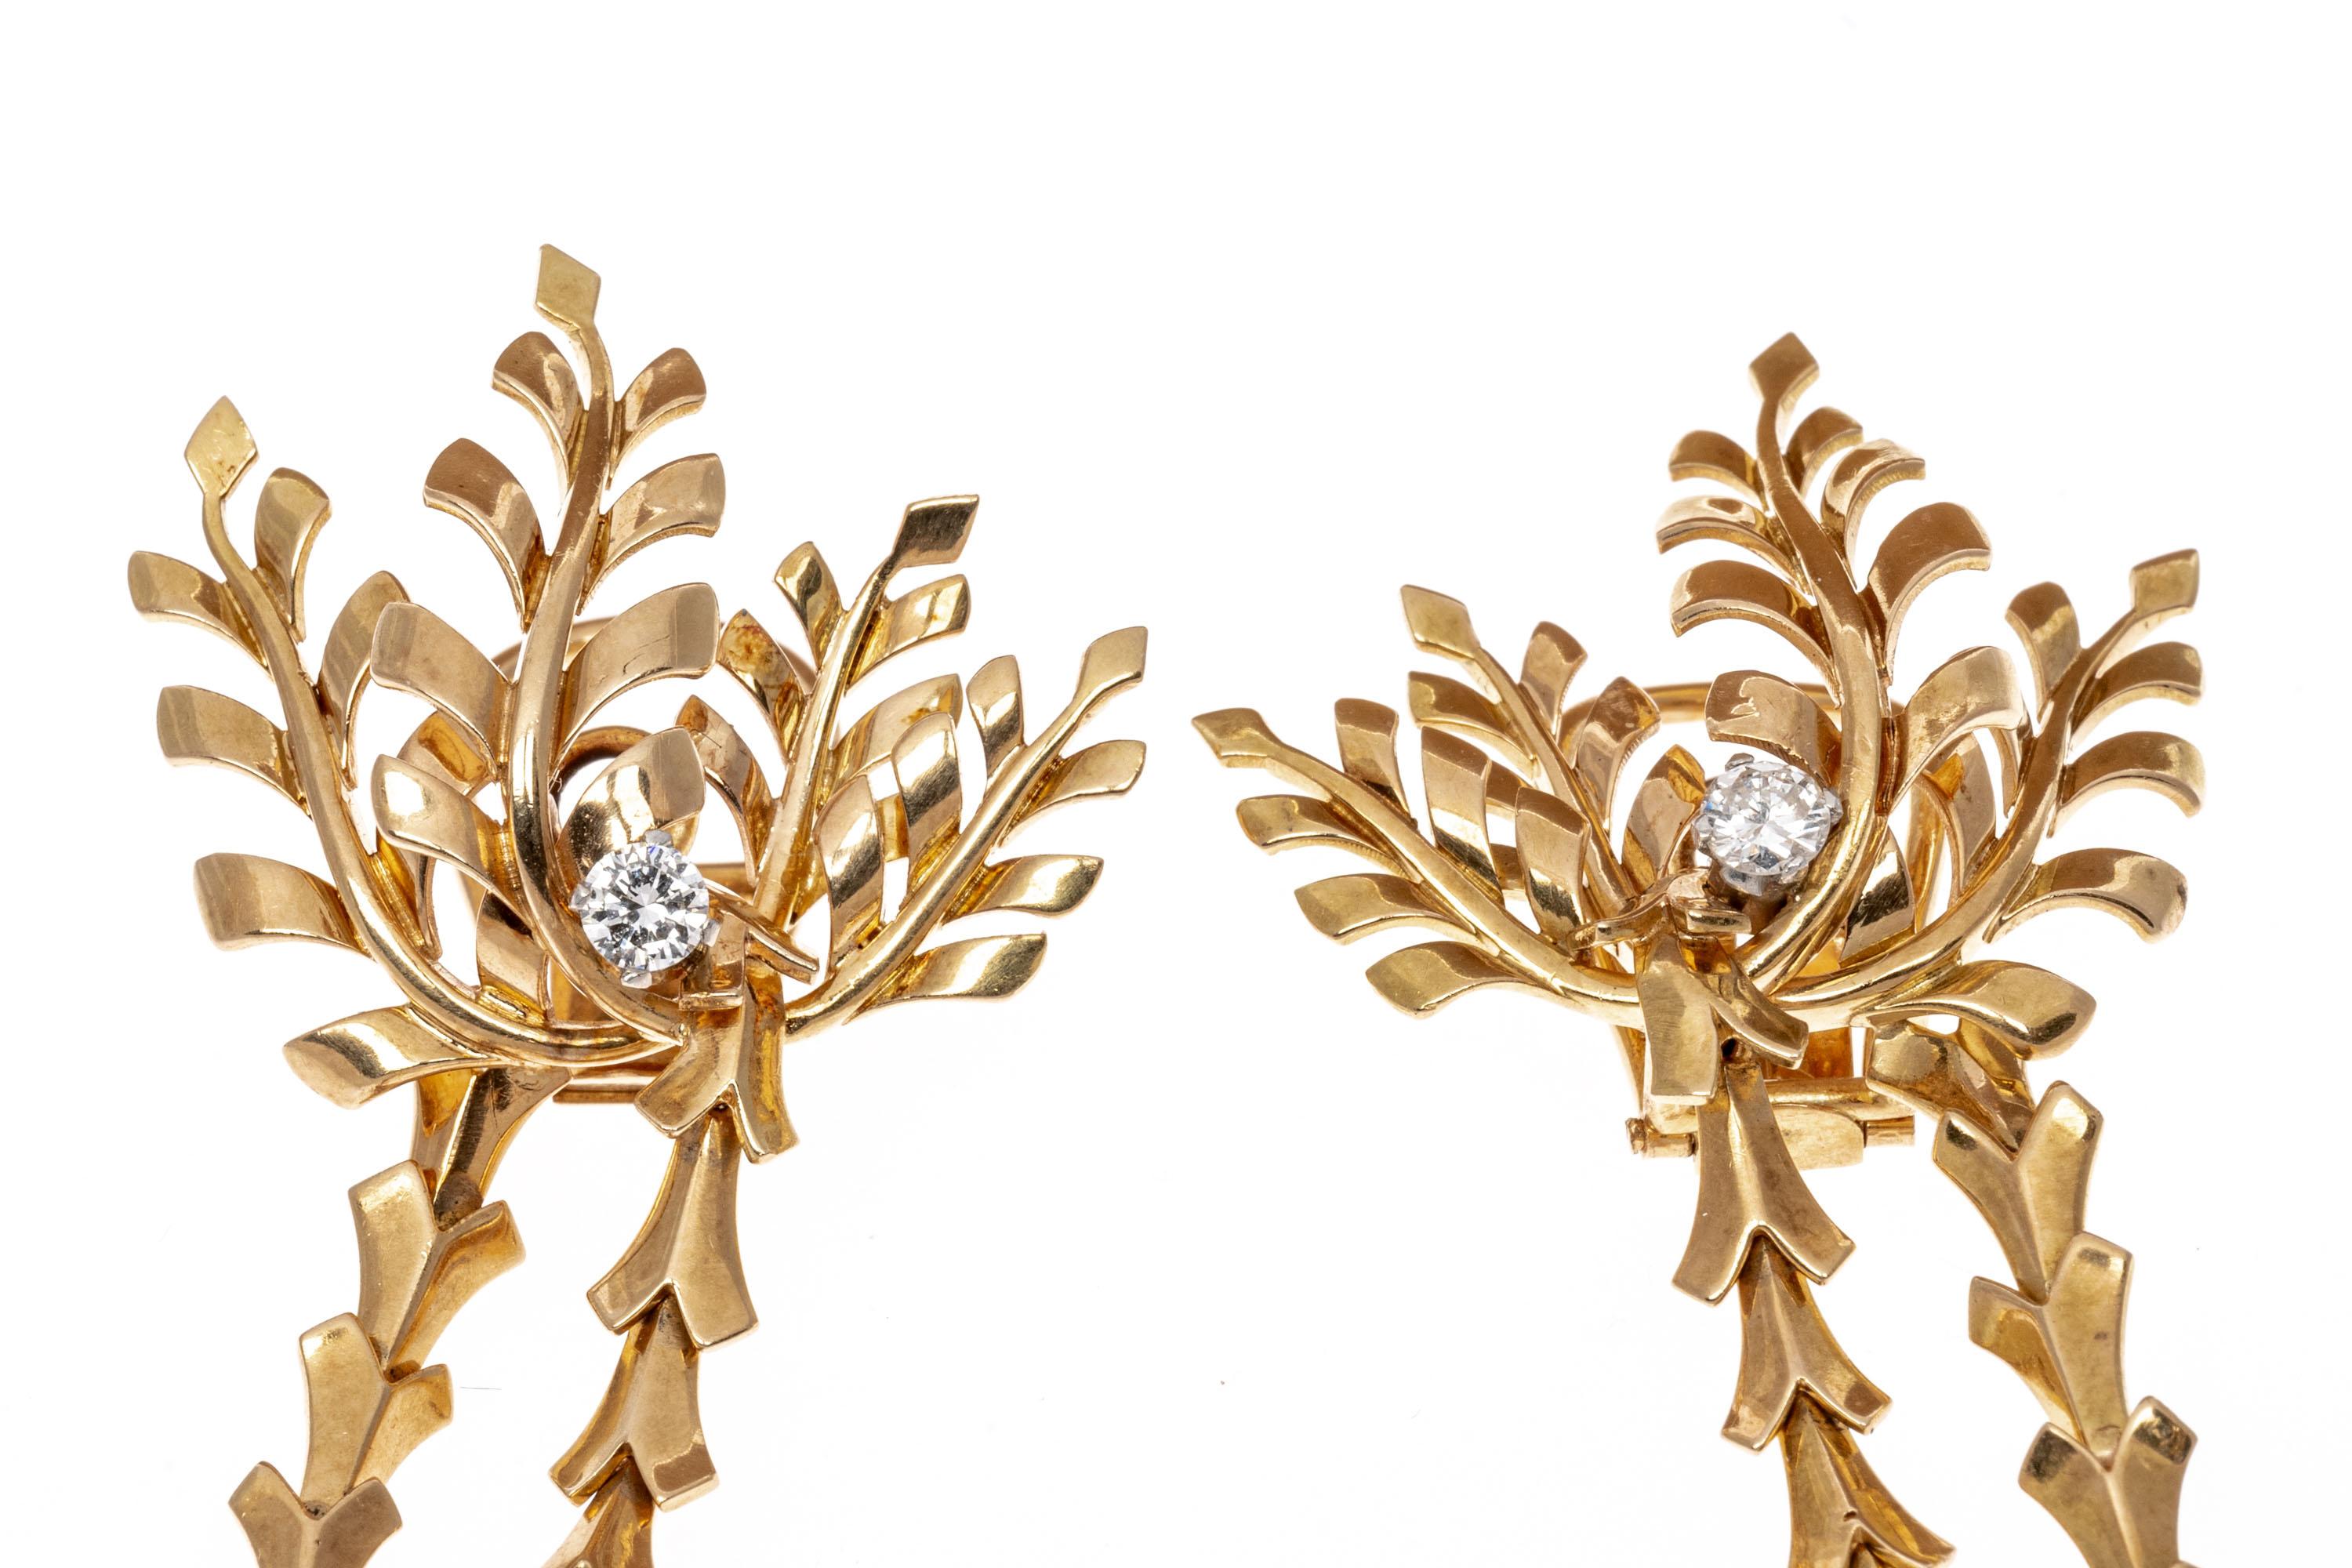 These 18K yellow gold impressive, sophisticated and beautifully made earrings are a leaf motif. The tops are set with four curved leaves, with a round brilliant cut diamond, prong set, set at the base. Suspended from the top are two vertical,